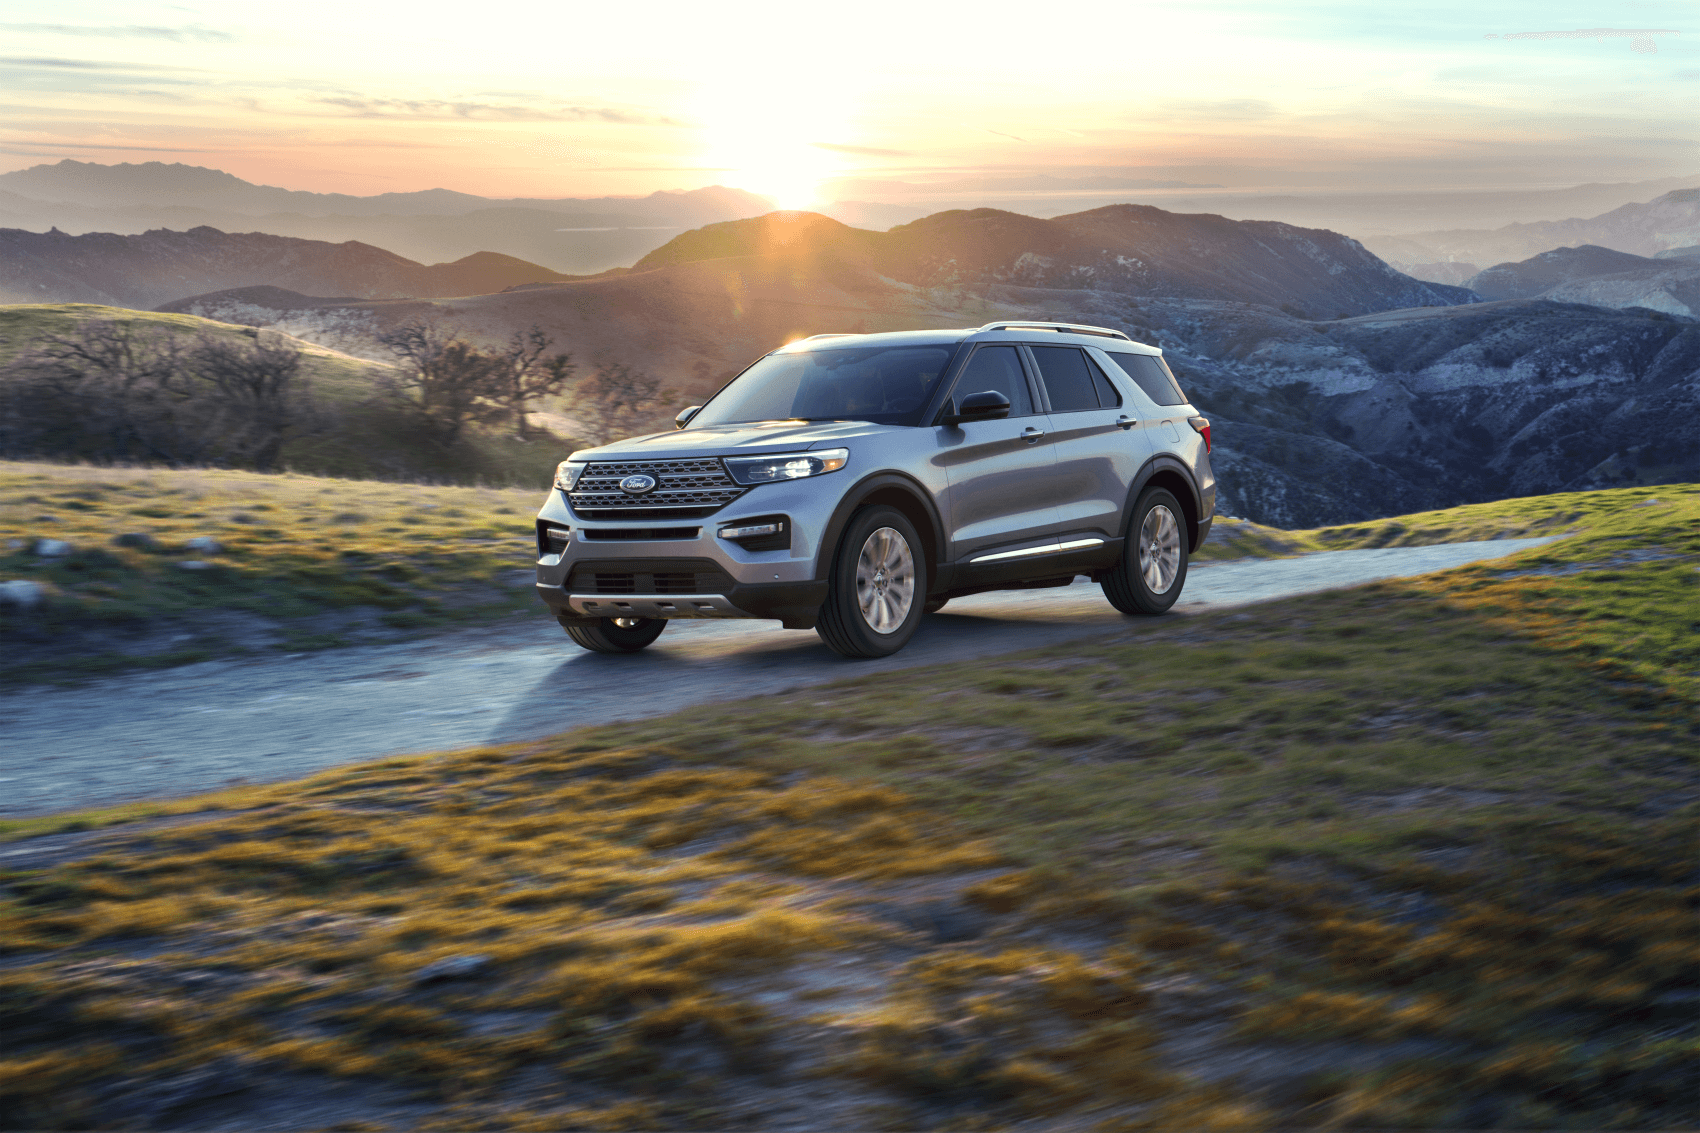 2021 Ford Explorer Silver Mountain Tunkhannock Ford